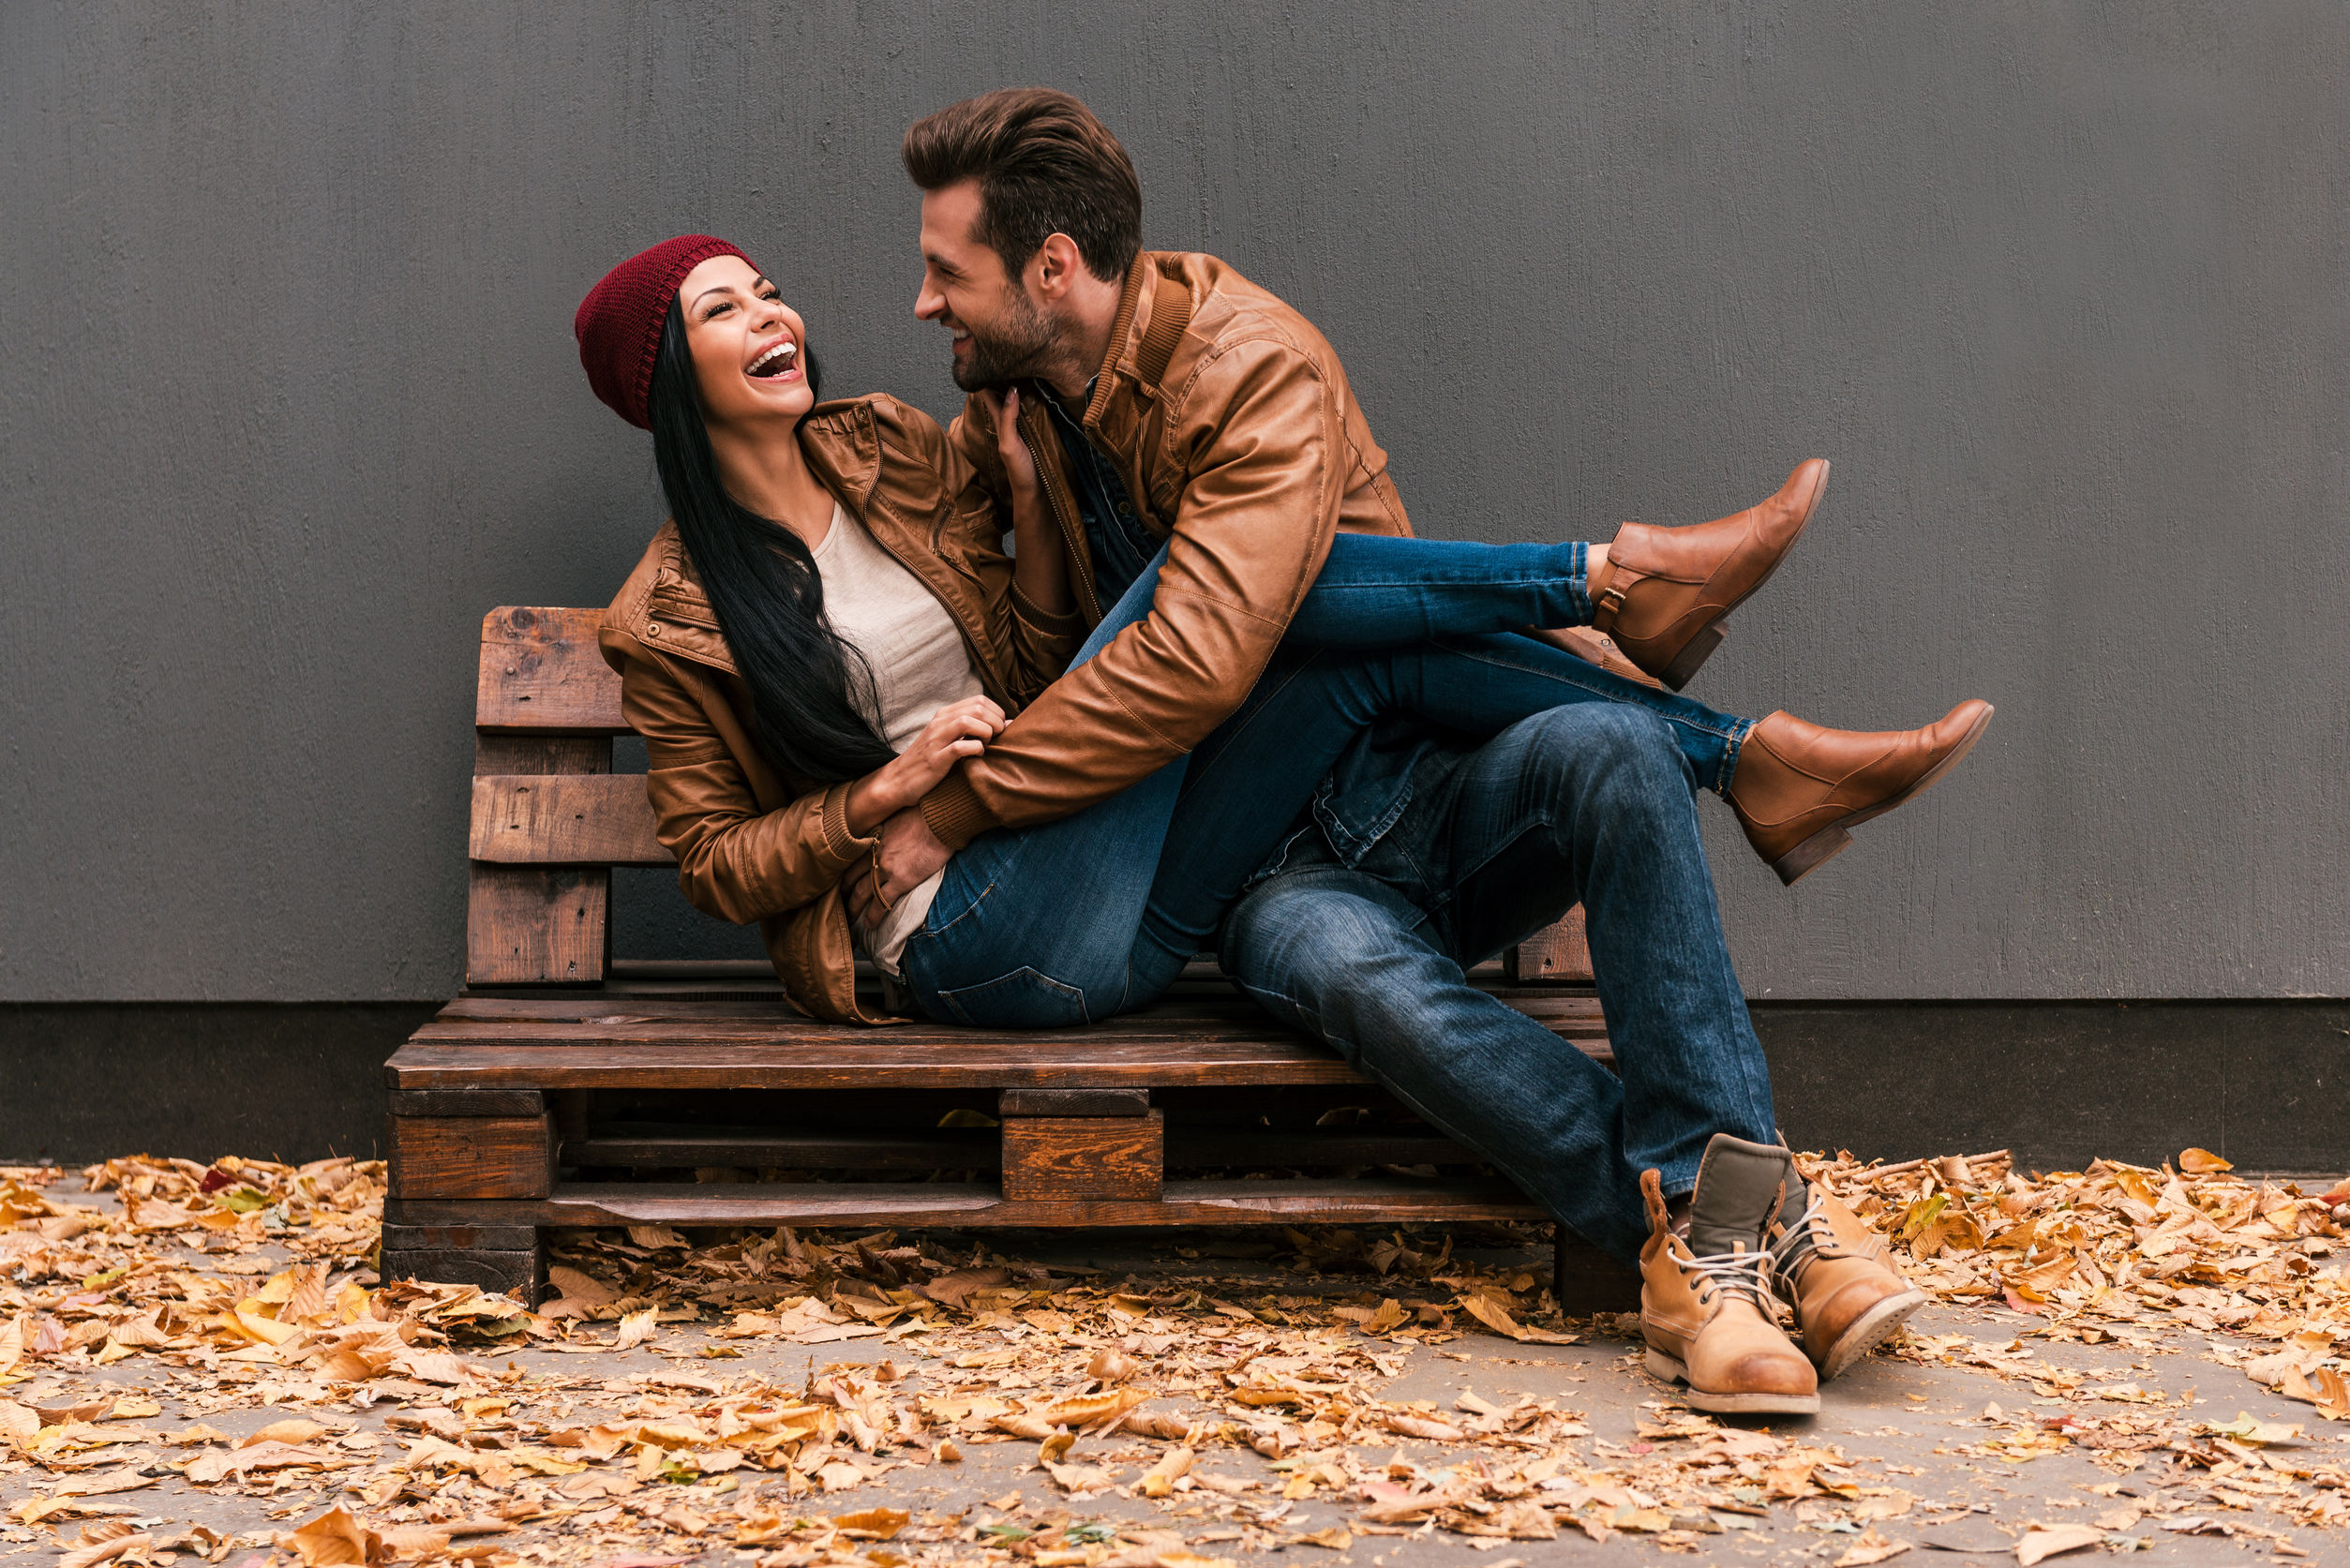 45974527 - carefree time together. beautiful young couple having fun together while sitting on the wooden pallet together with grey wall in the background and fallen leaves on ht floor